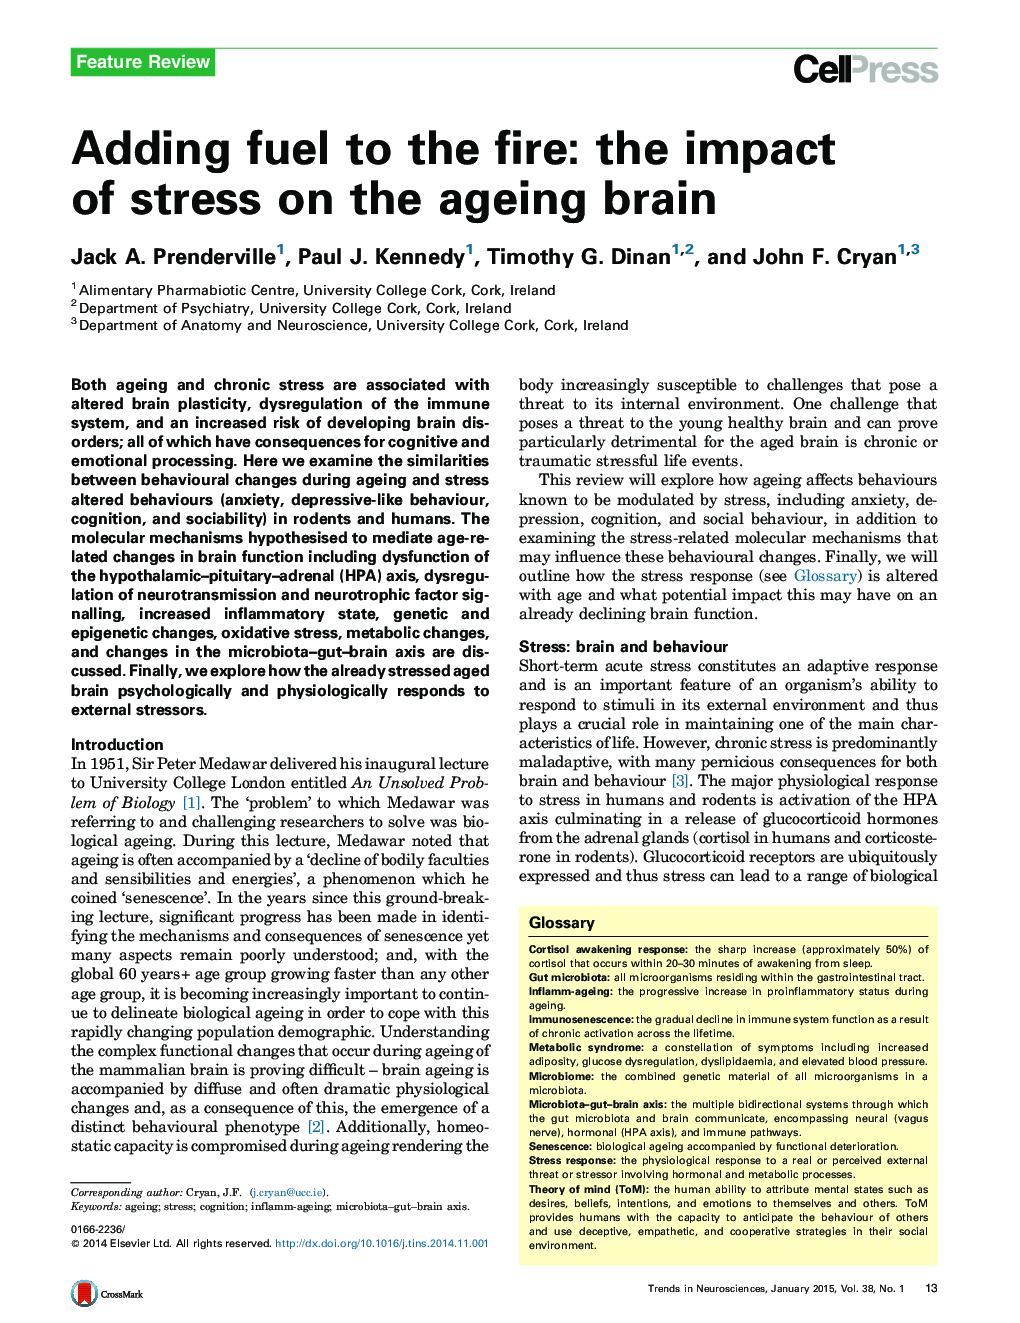 Adding fuel to the fire: the impact of stress on the ageing brain